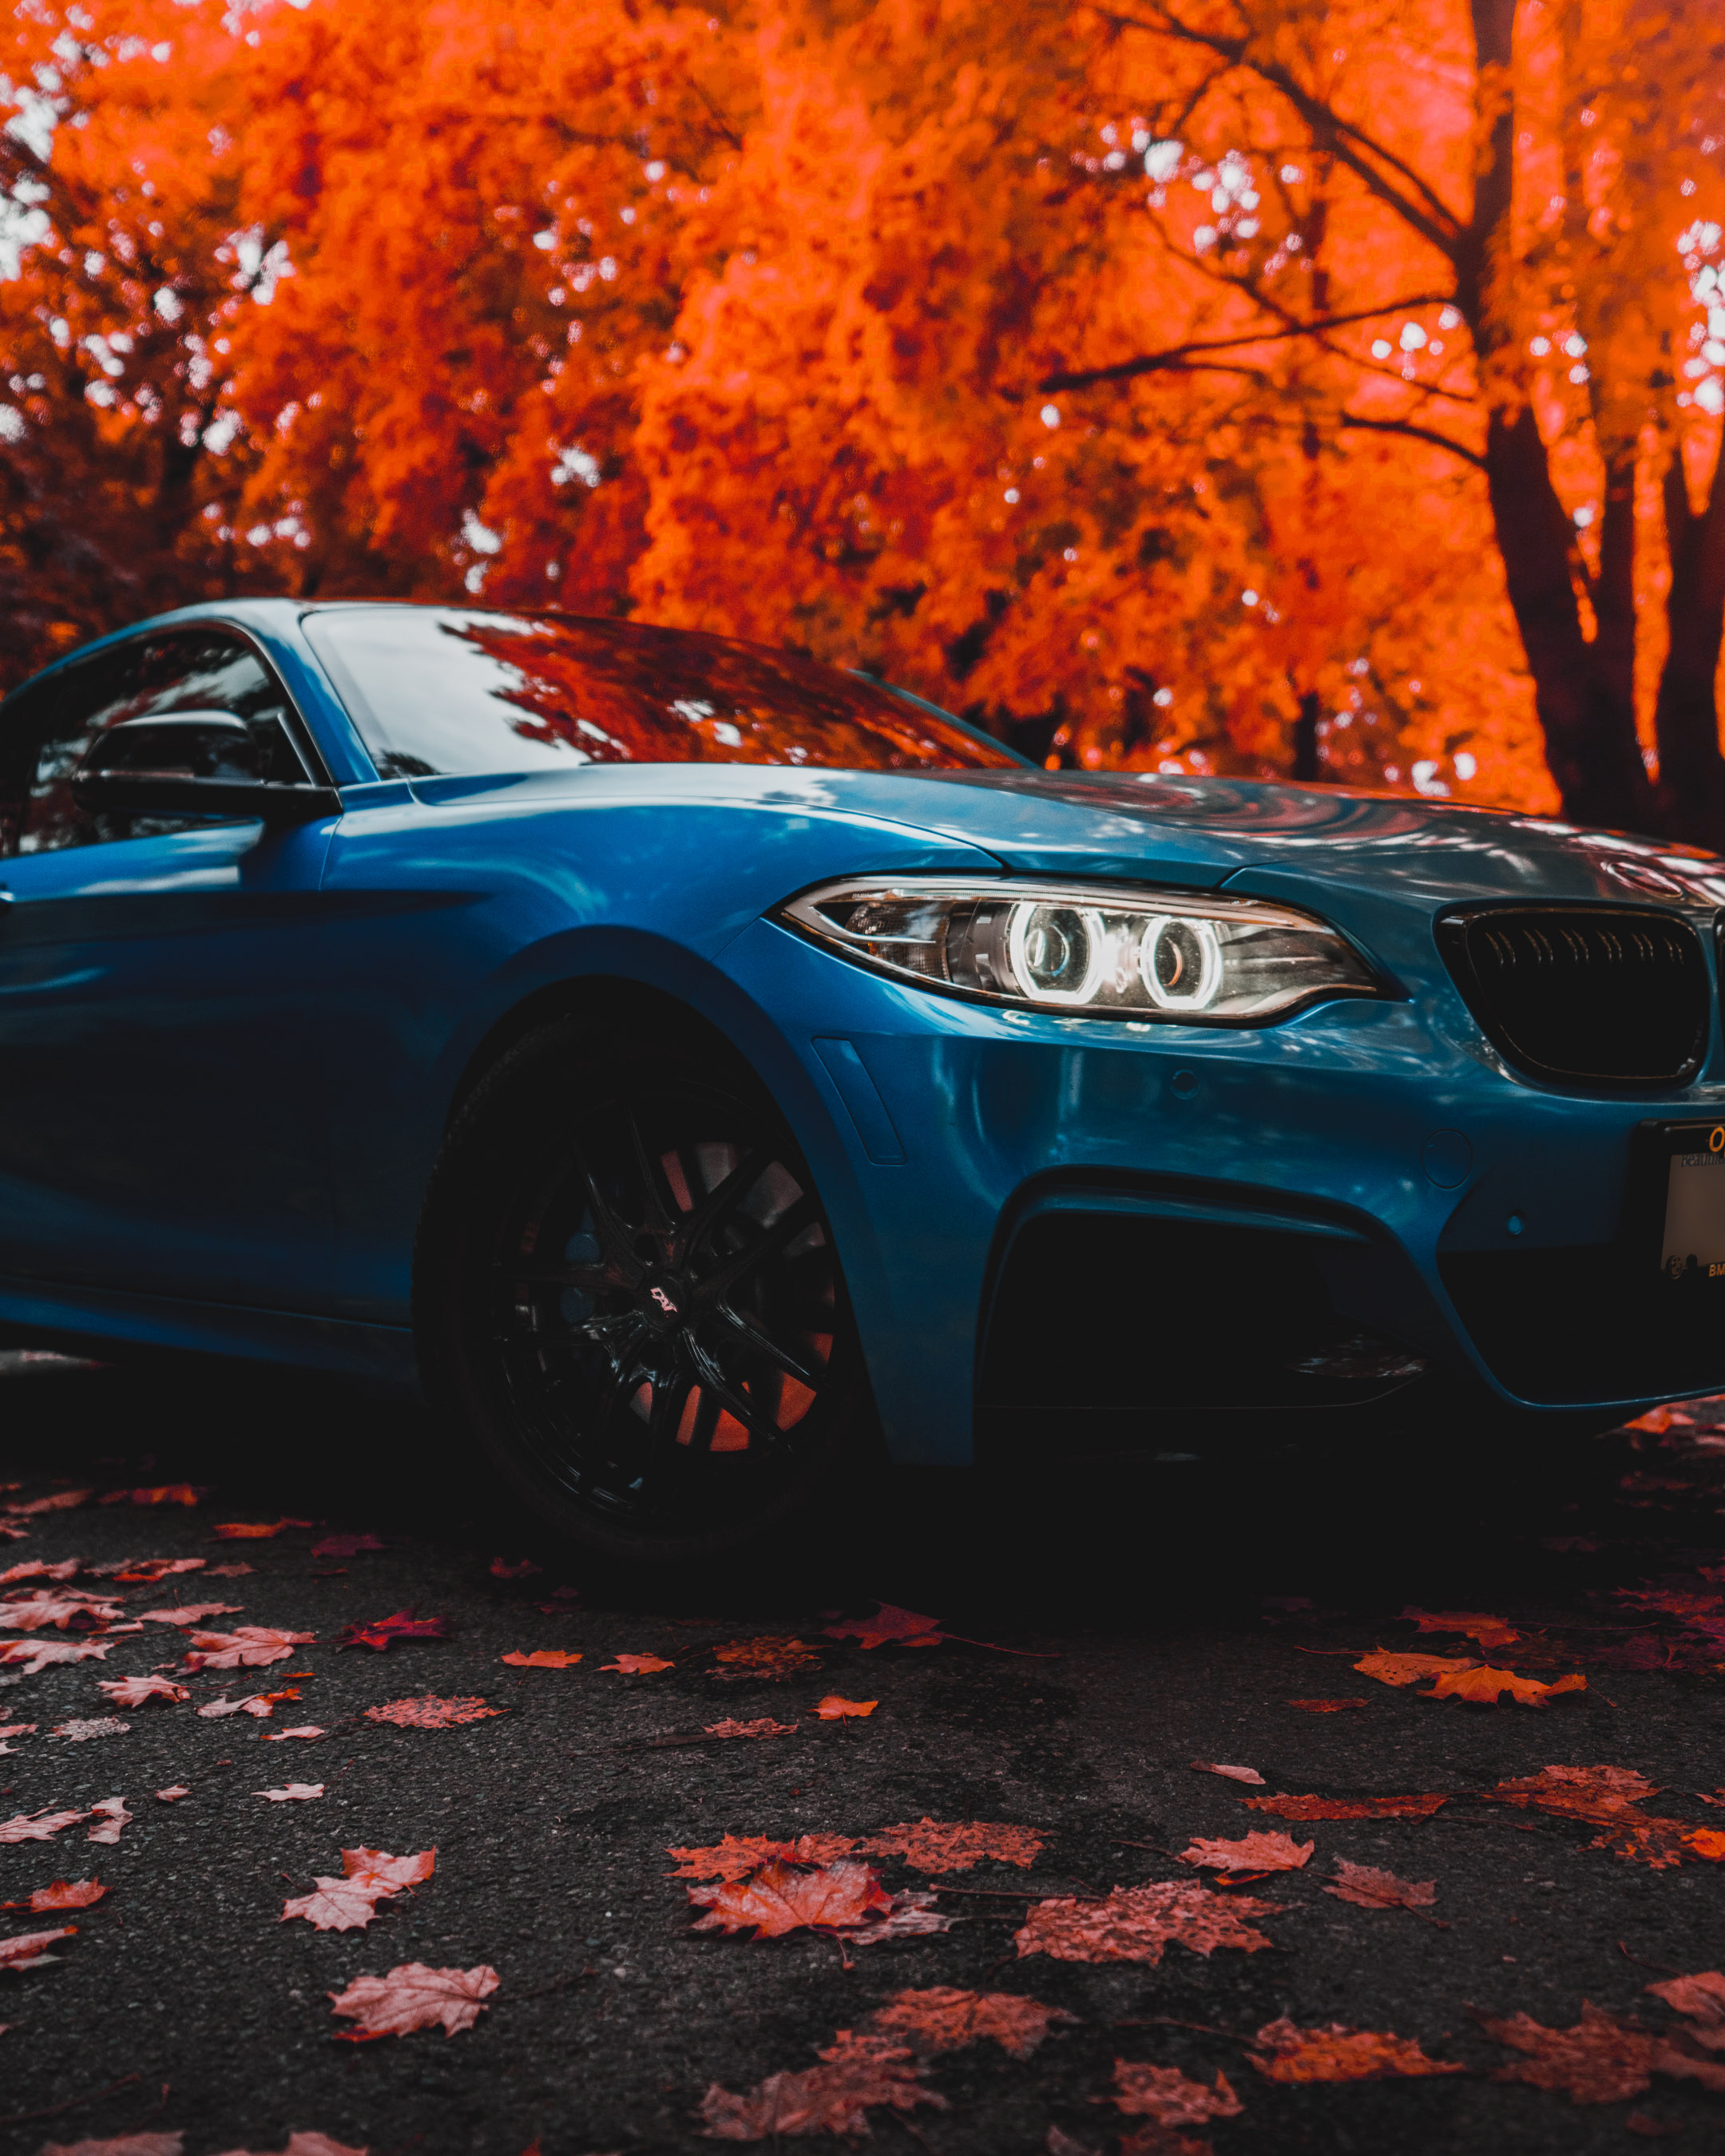 2016 Blue BMW 2 series upclose with the backdrop of Fall leaves